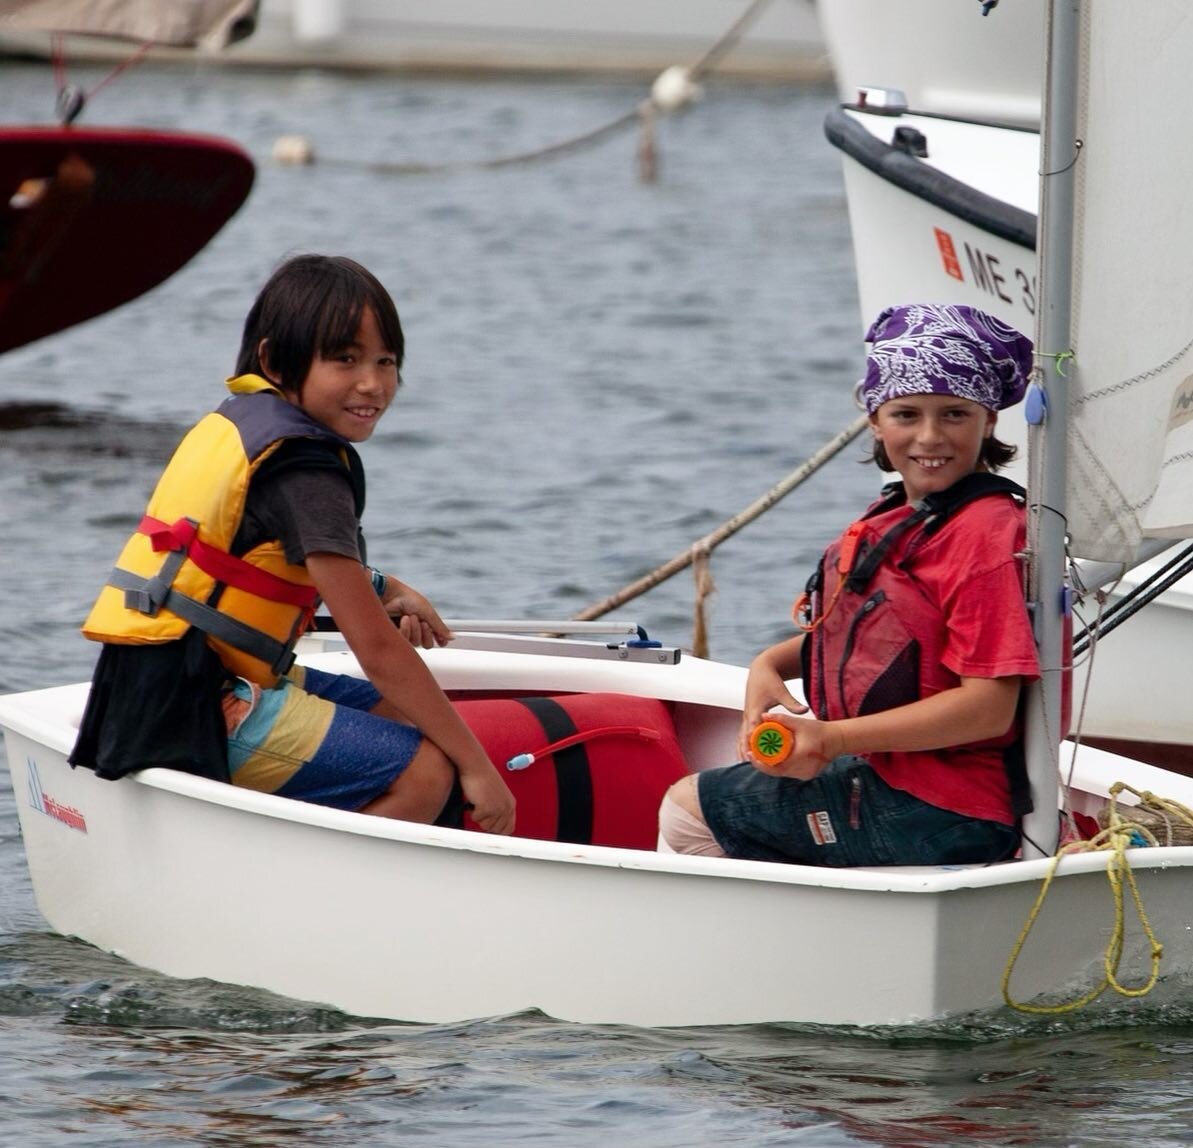 Calling all Opti Sailors! ⛵️💙 Classes start 6/19! 👀 Come join us. 
📷: @tommynorgang 
#kidswhosail #optisailing #kseacountdown #summer2023